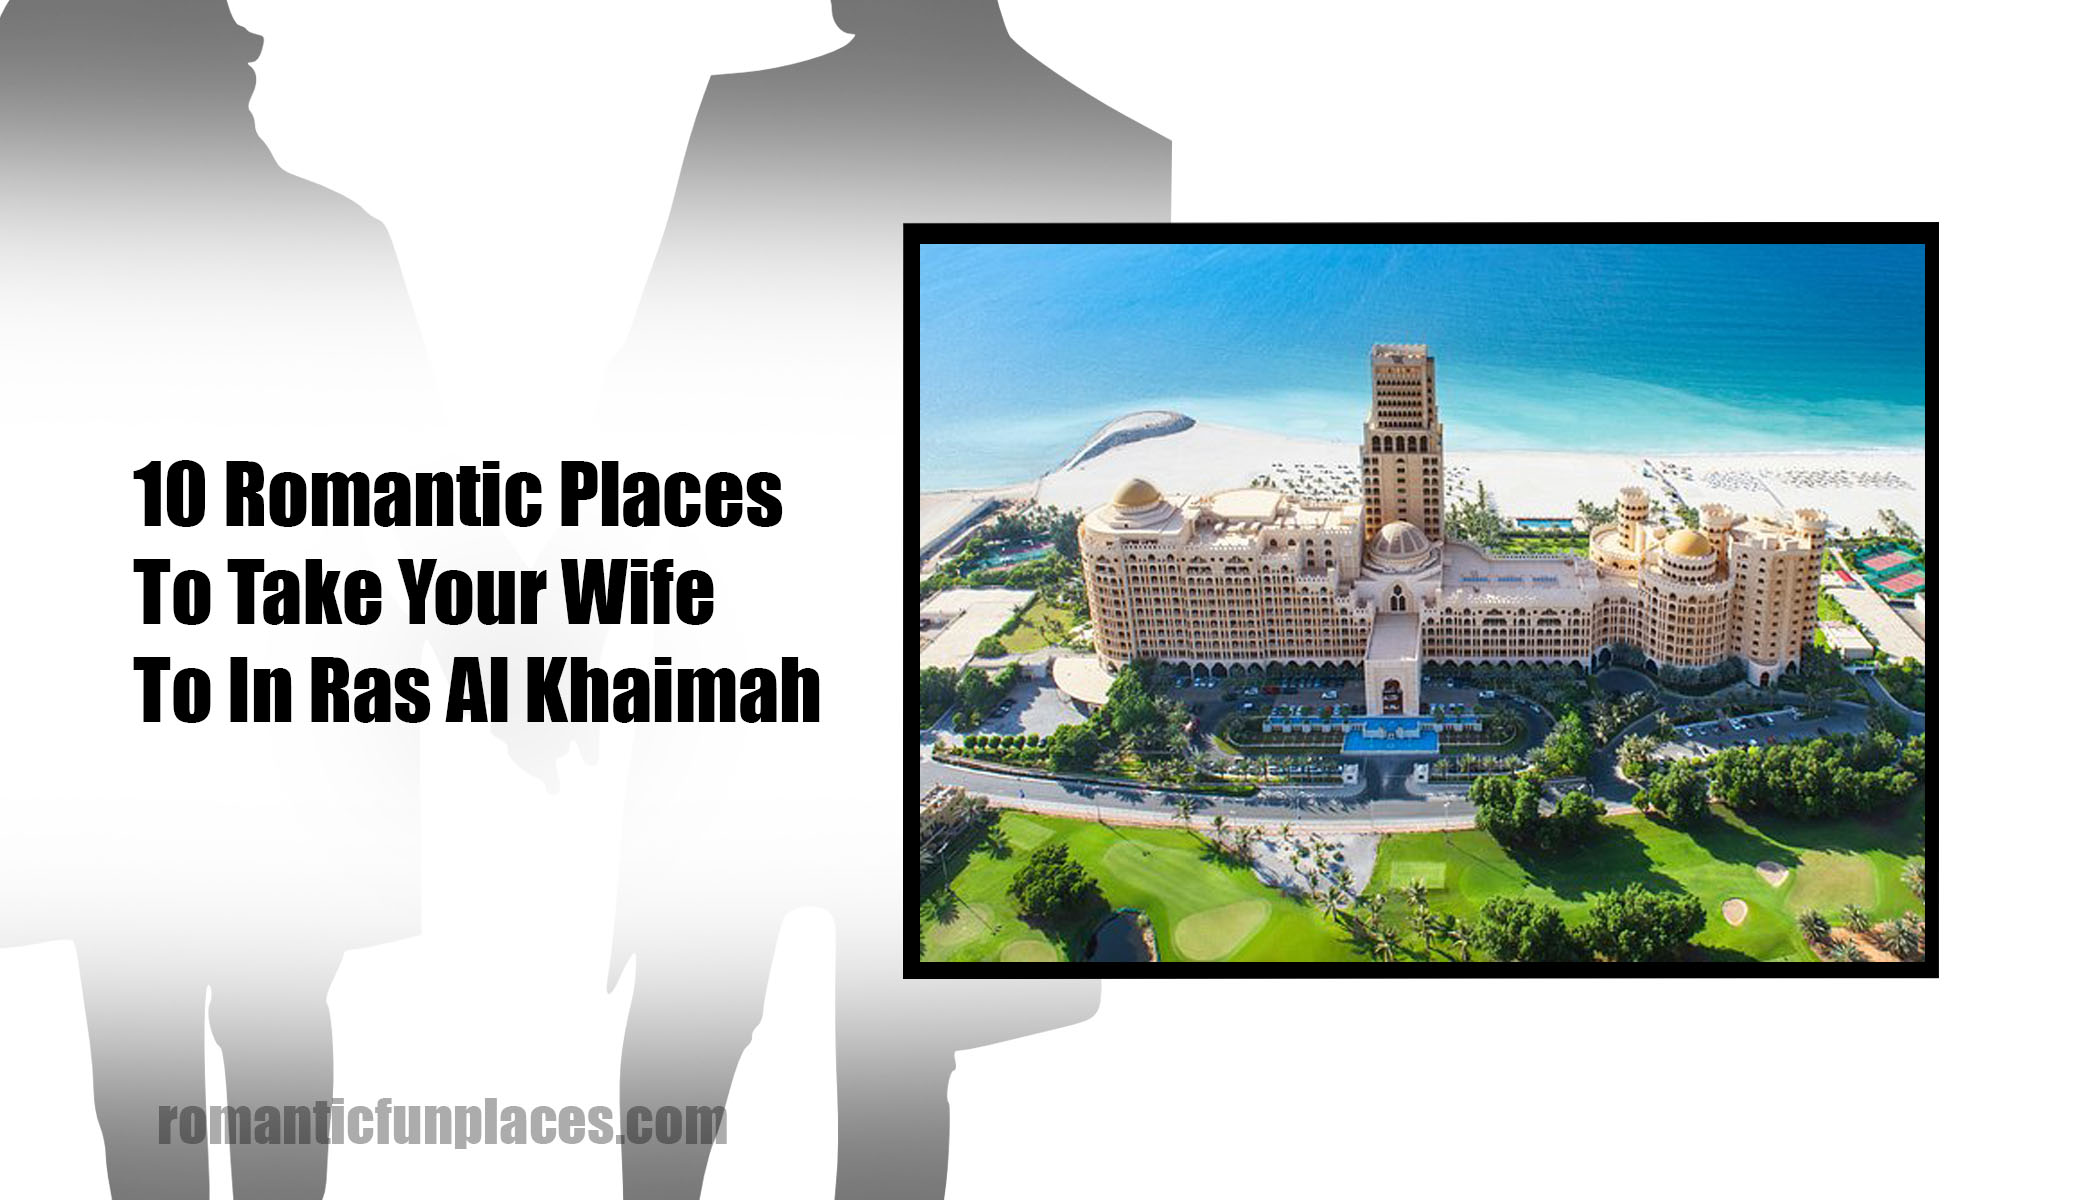 10 Romantic Places To Take Your Wife To In Ras Al Khaimah